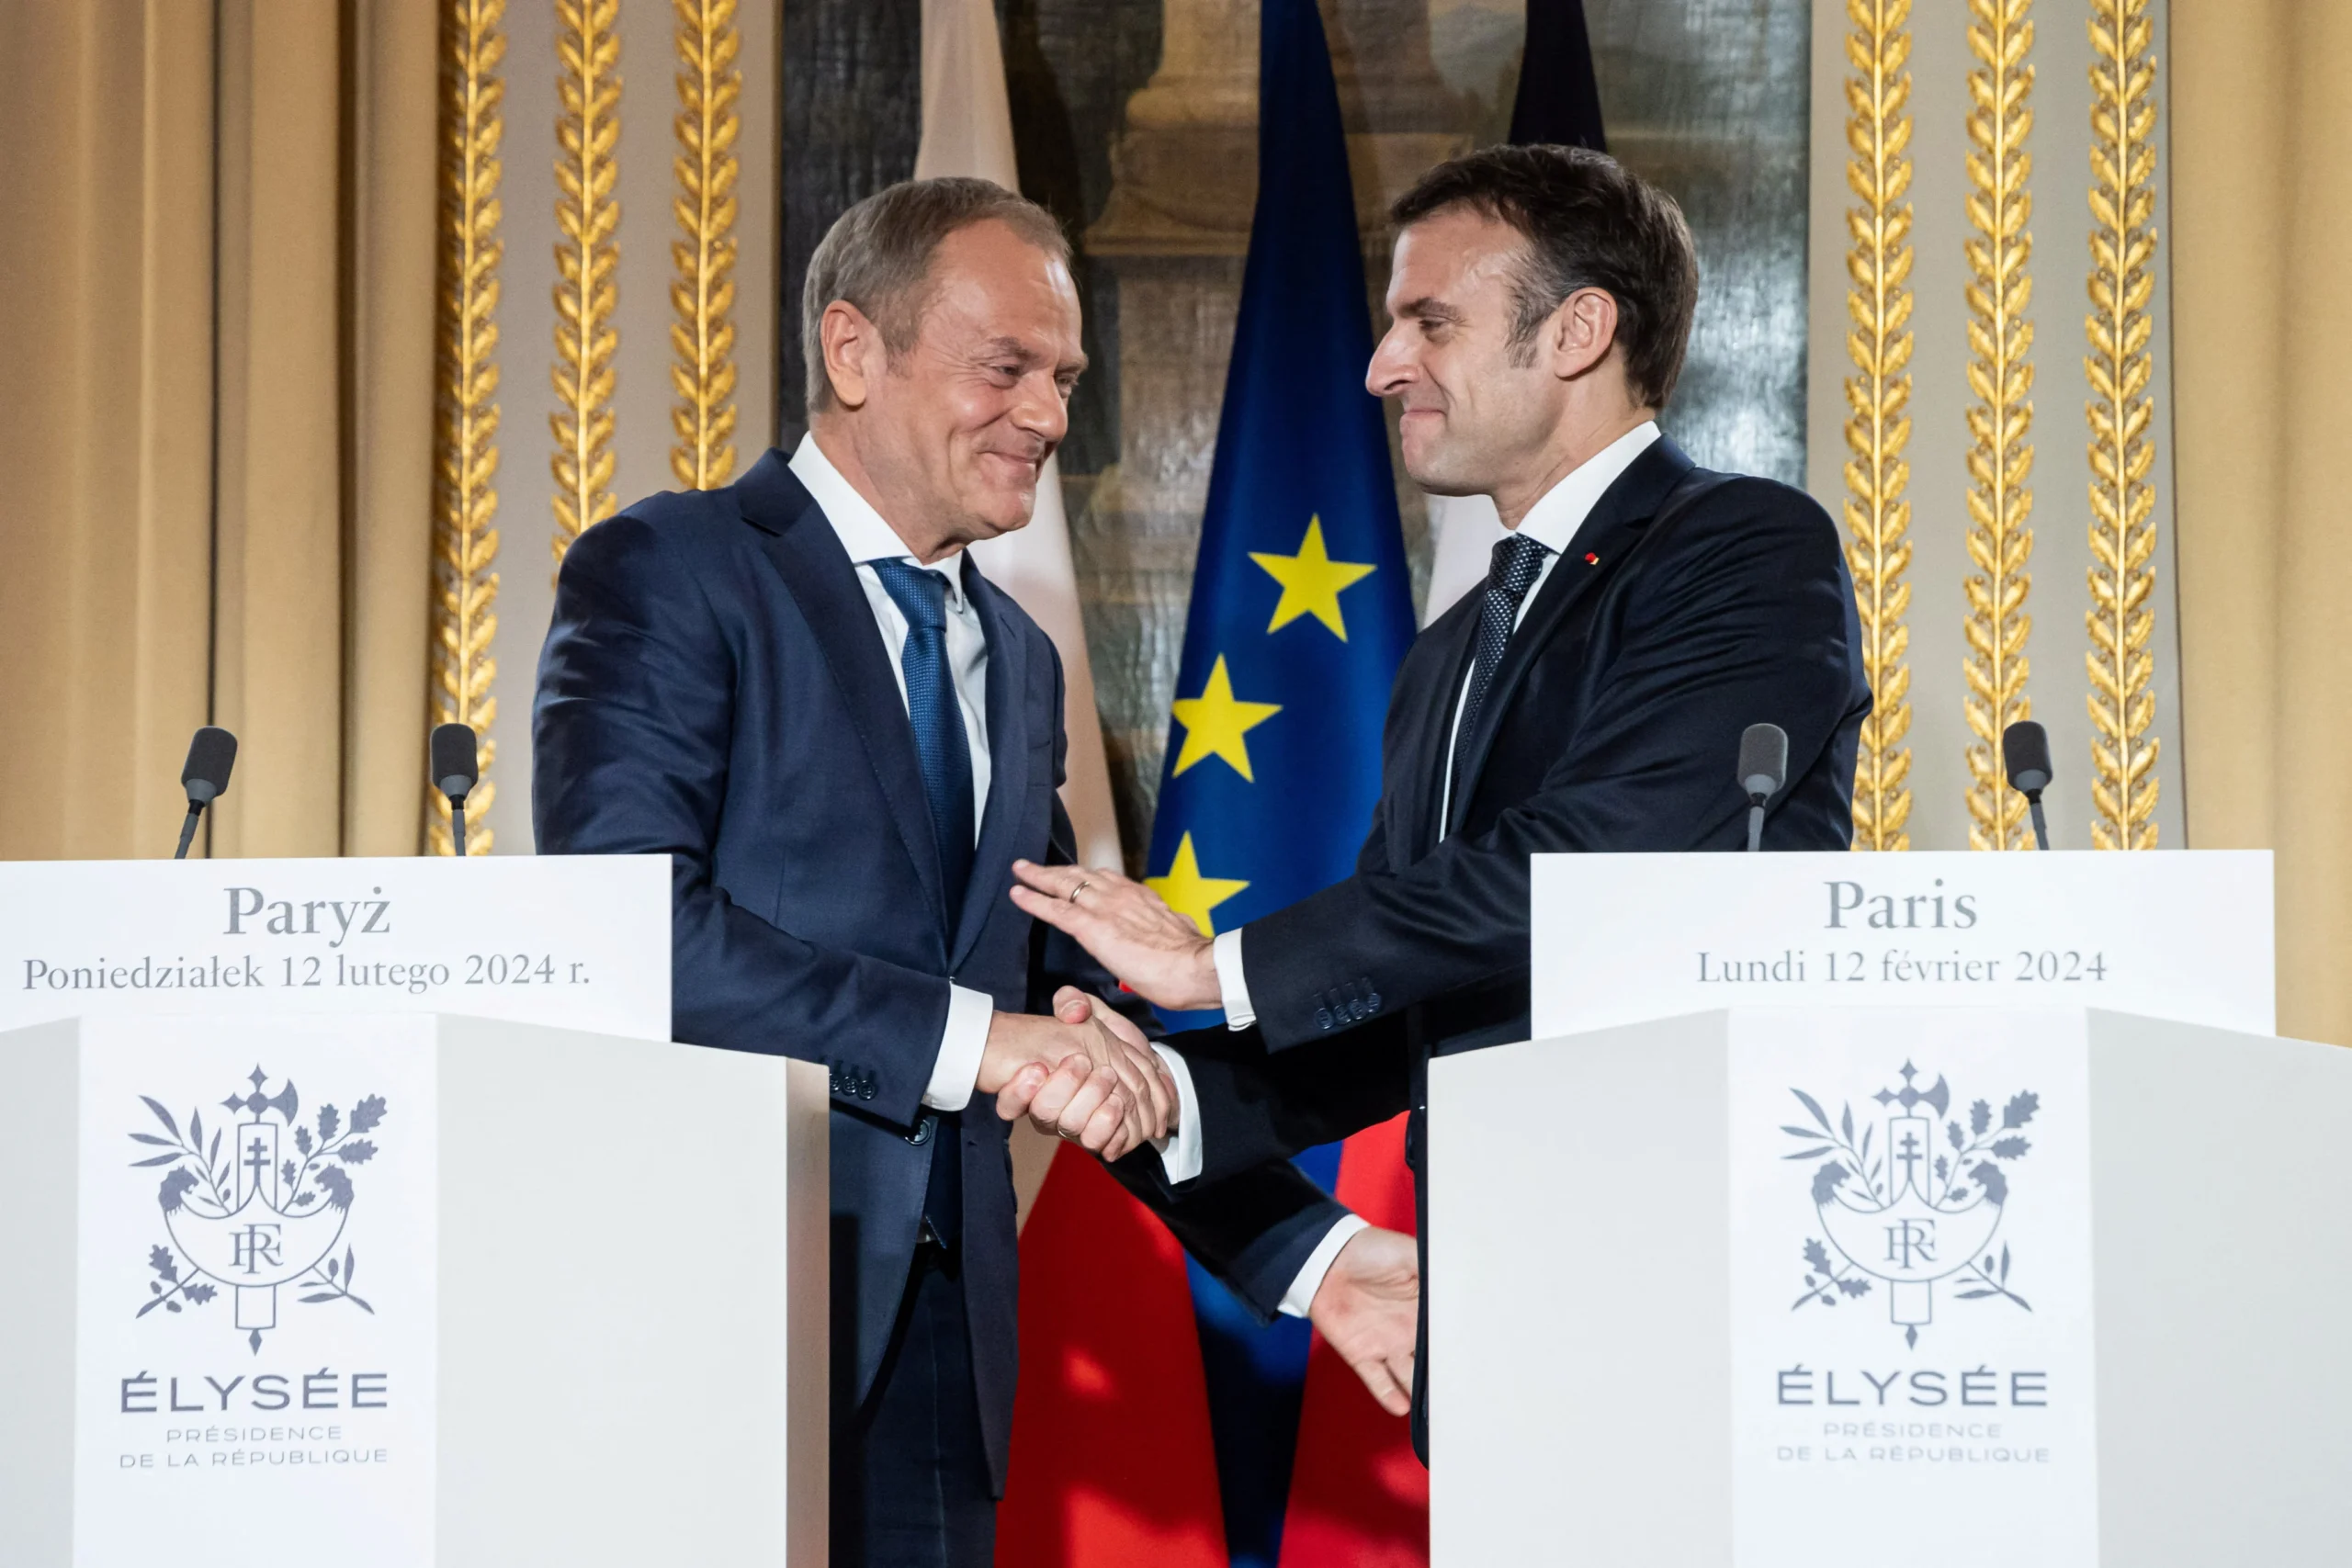 French and Polish perspectives on EU security as examples of the interests of two regions of the European Union